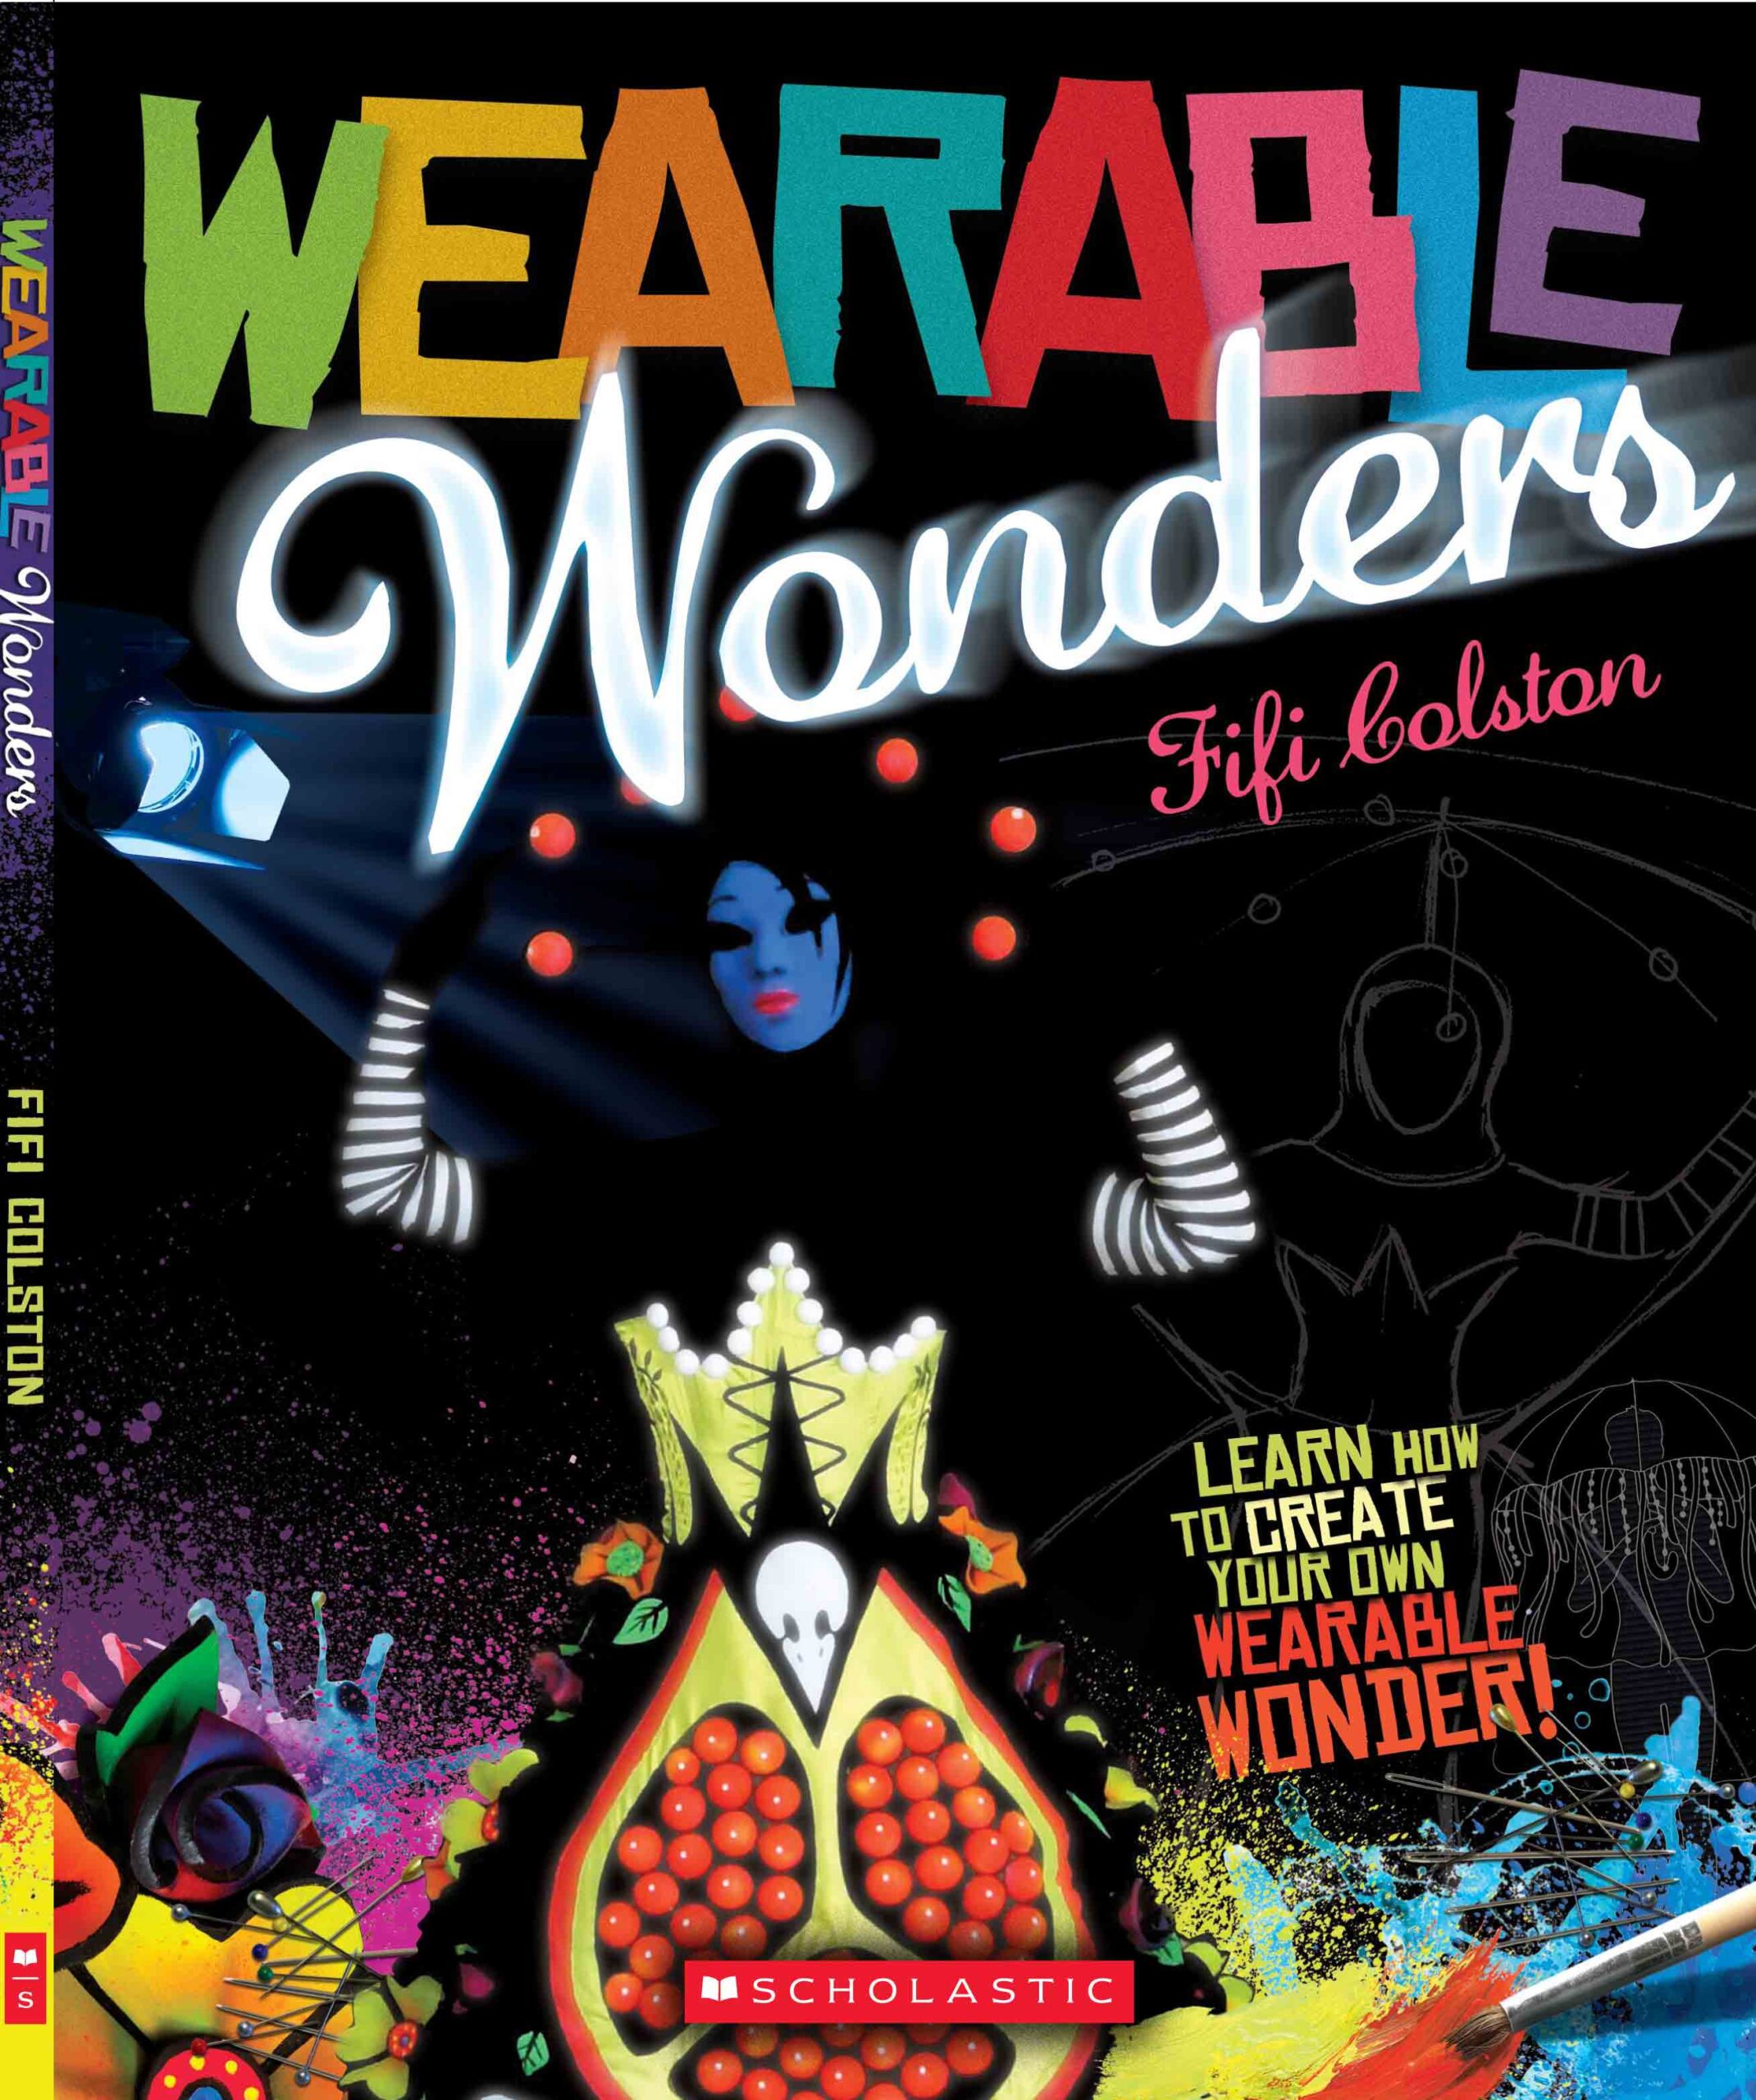 WearableWonders: Image of the cover of the book “Wearable Wonders”.